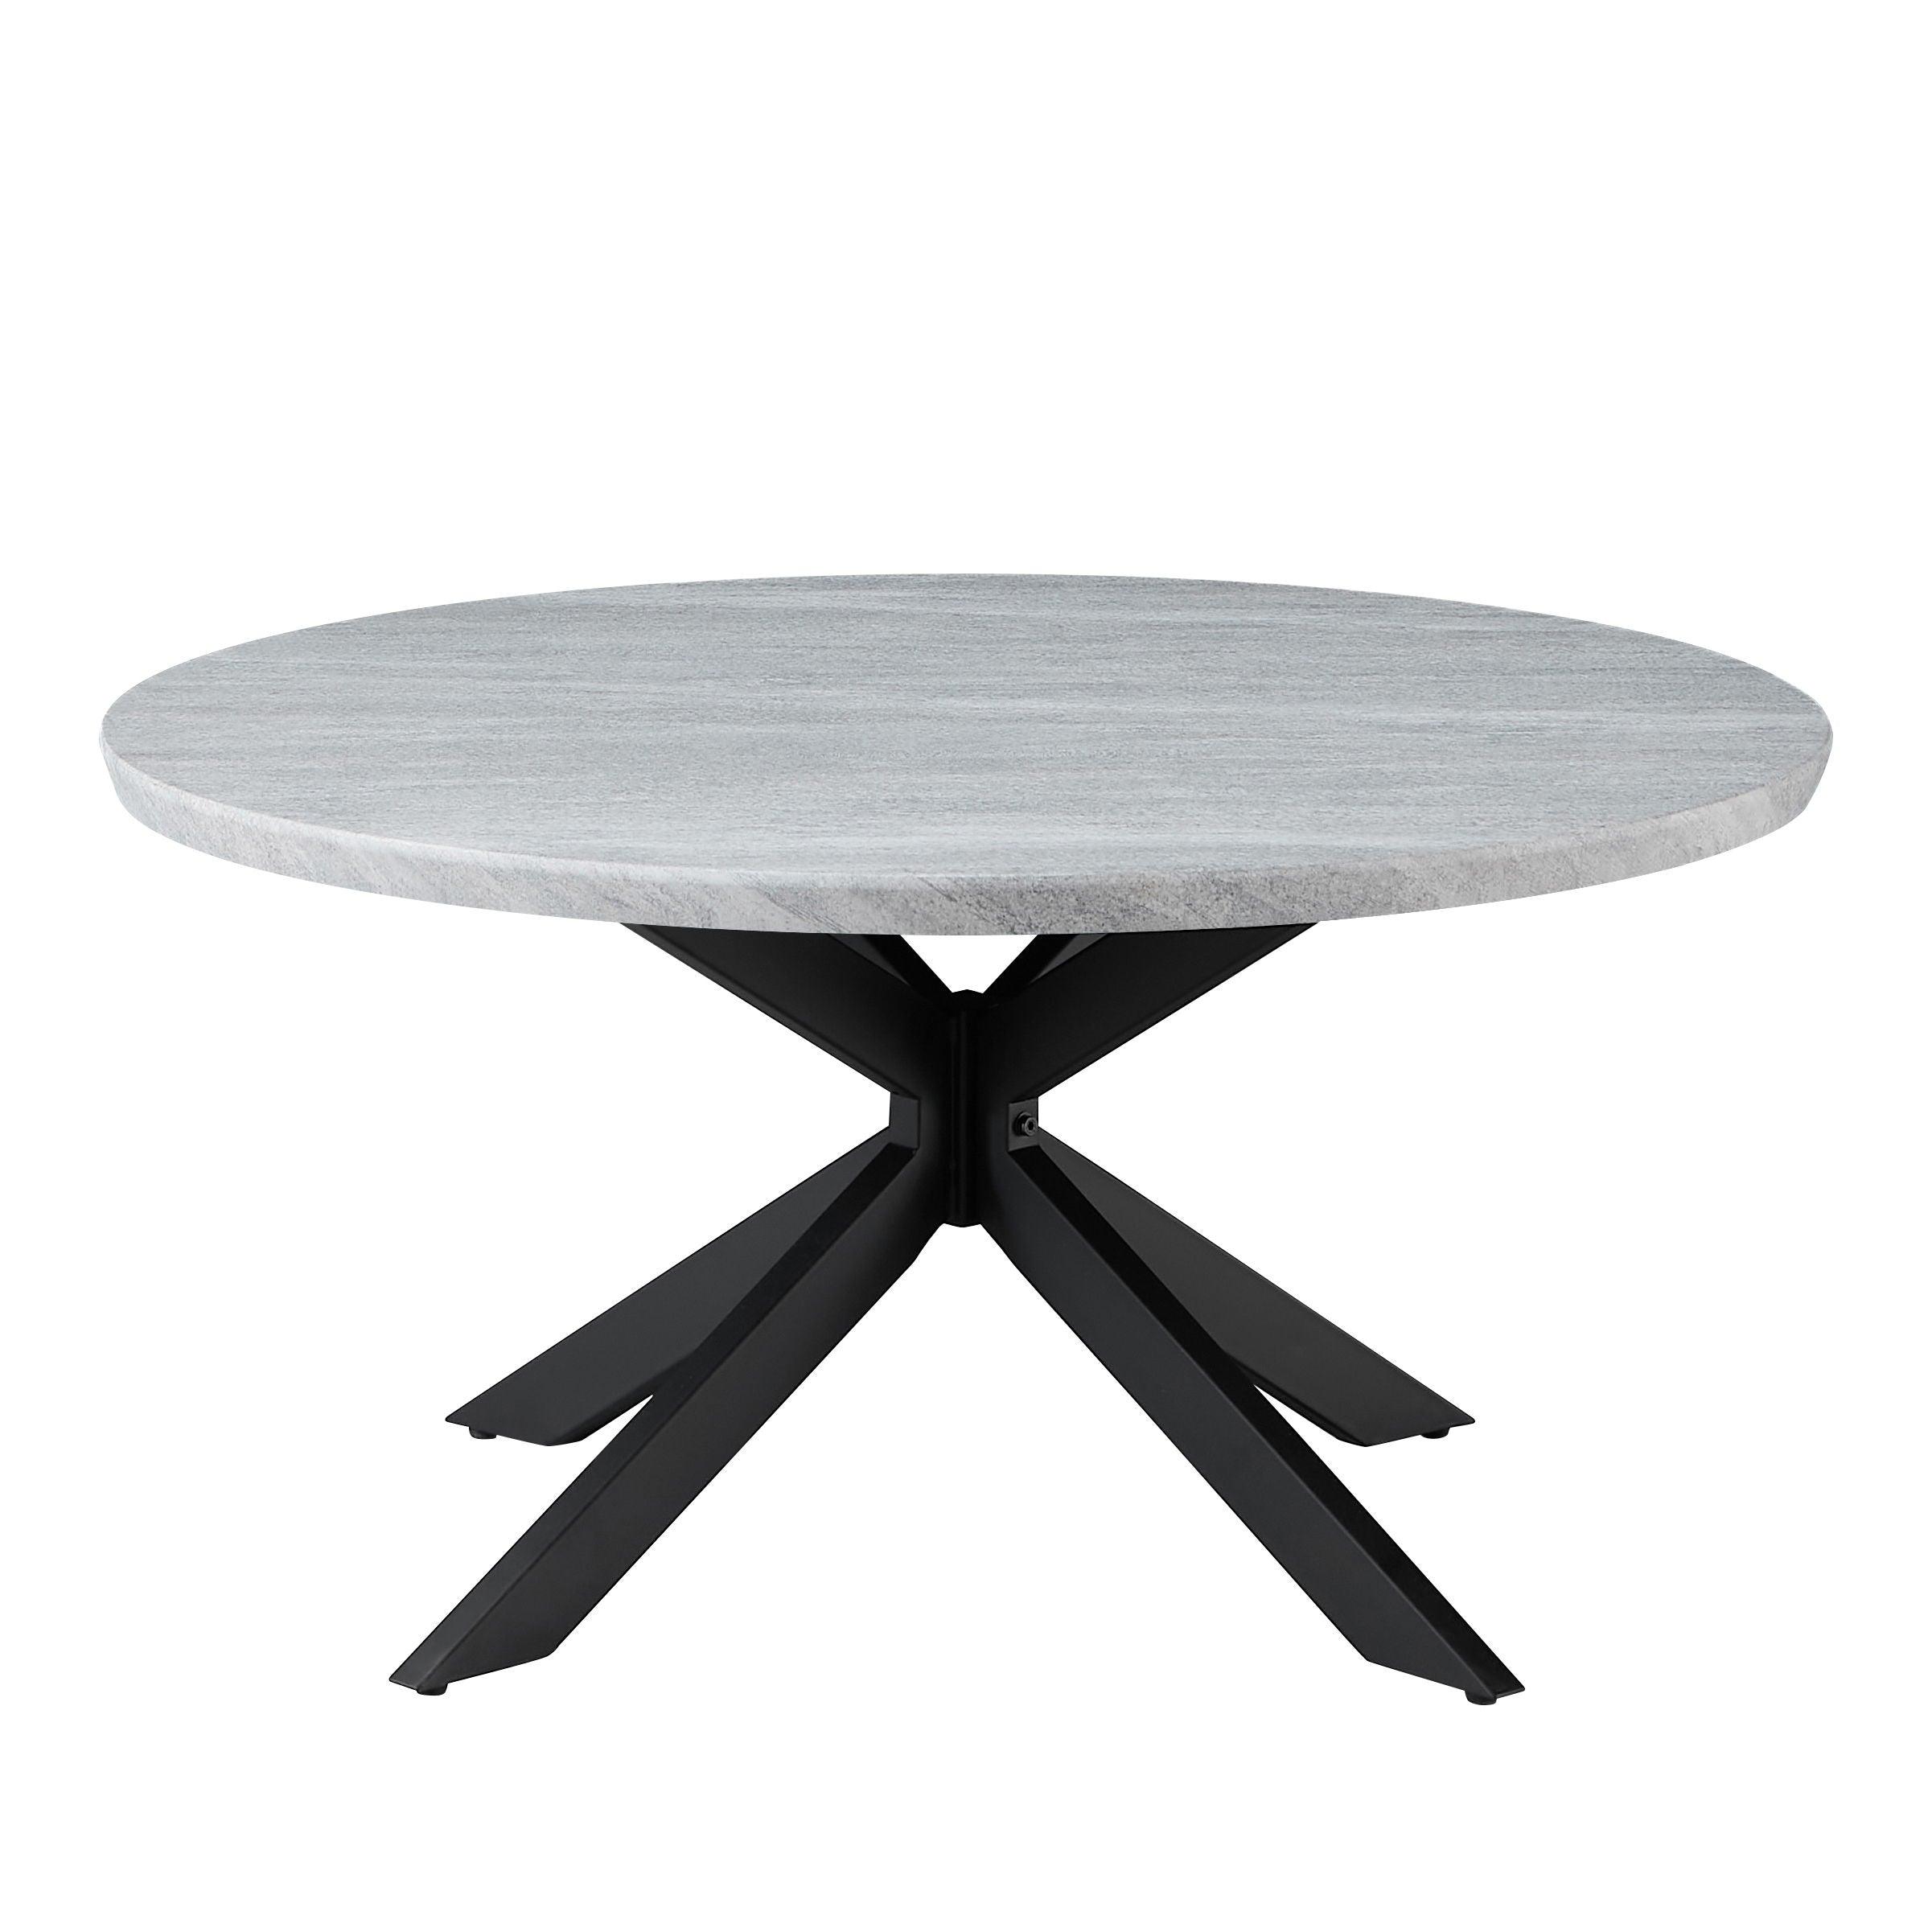 Steve Silver Furniture - Keyla - Faux Marble Round Cocktail Table - Gray - 5th Avenue Furniture